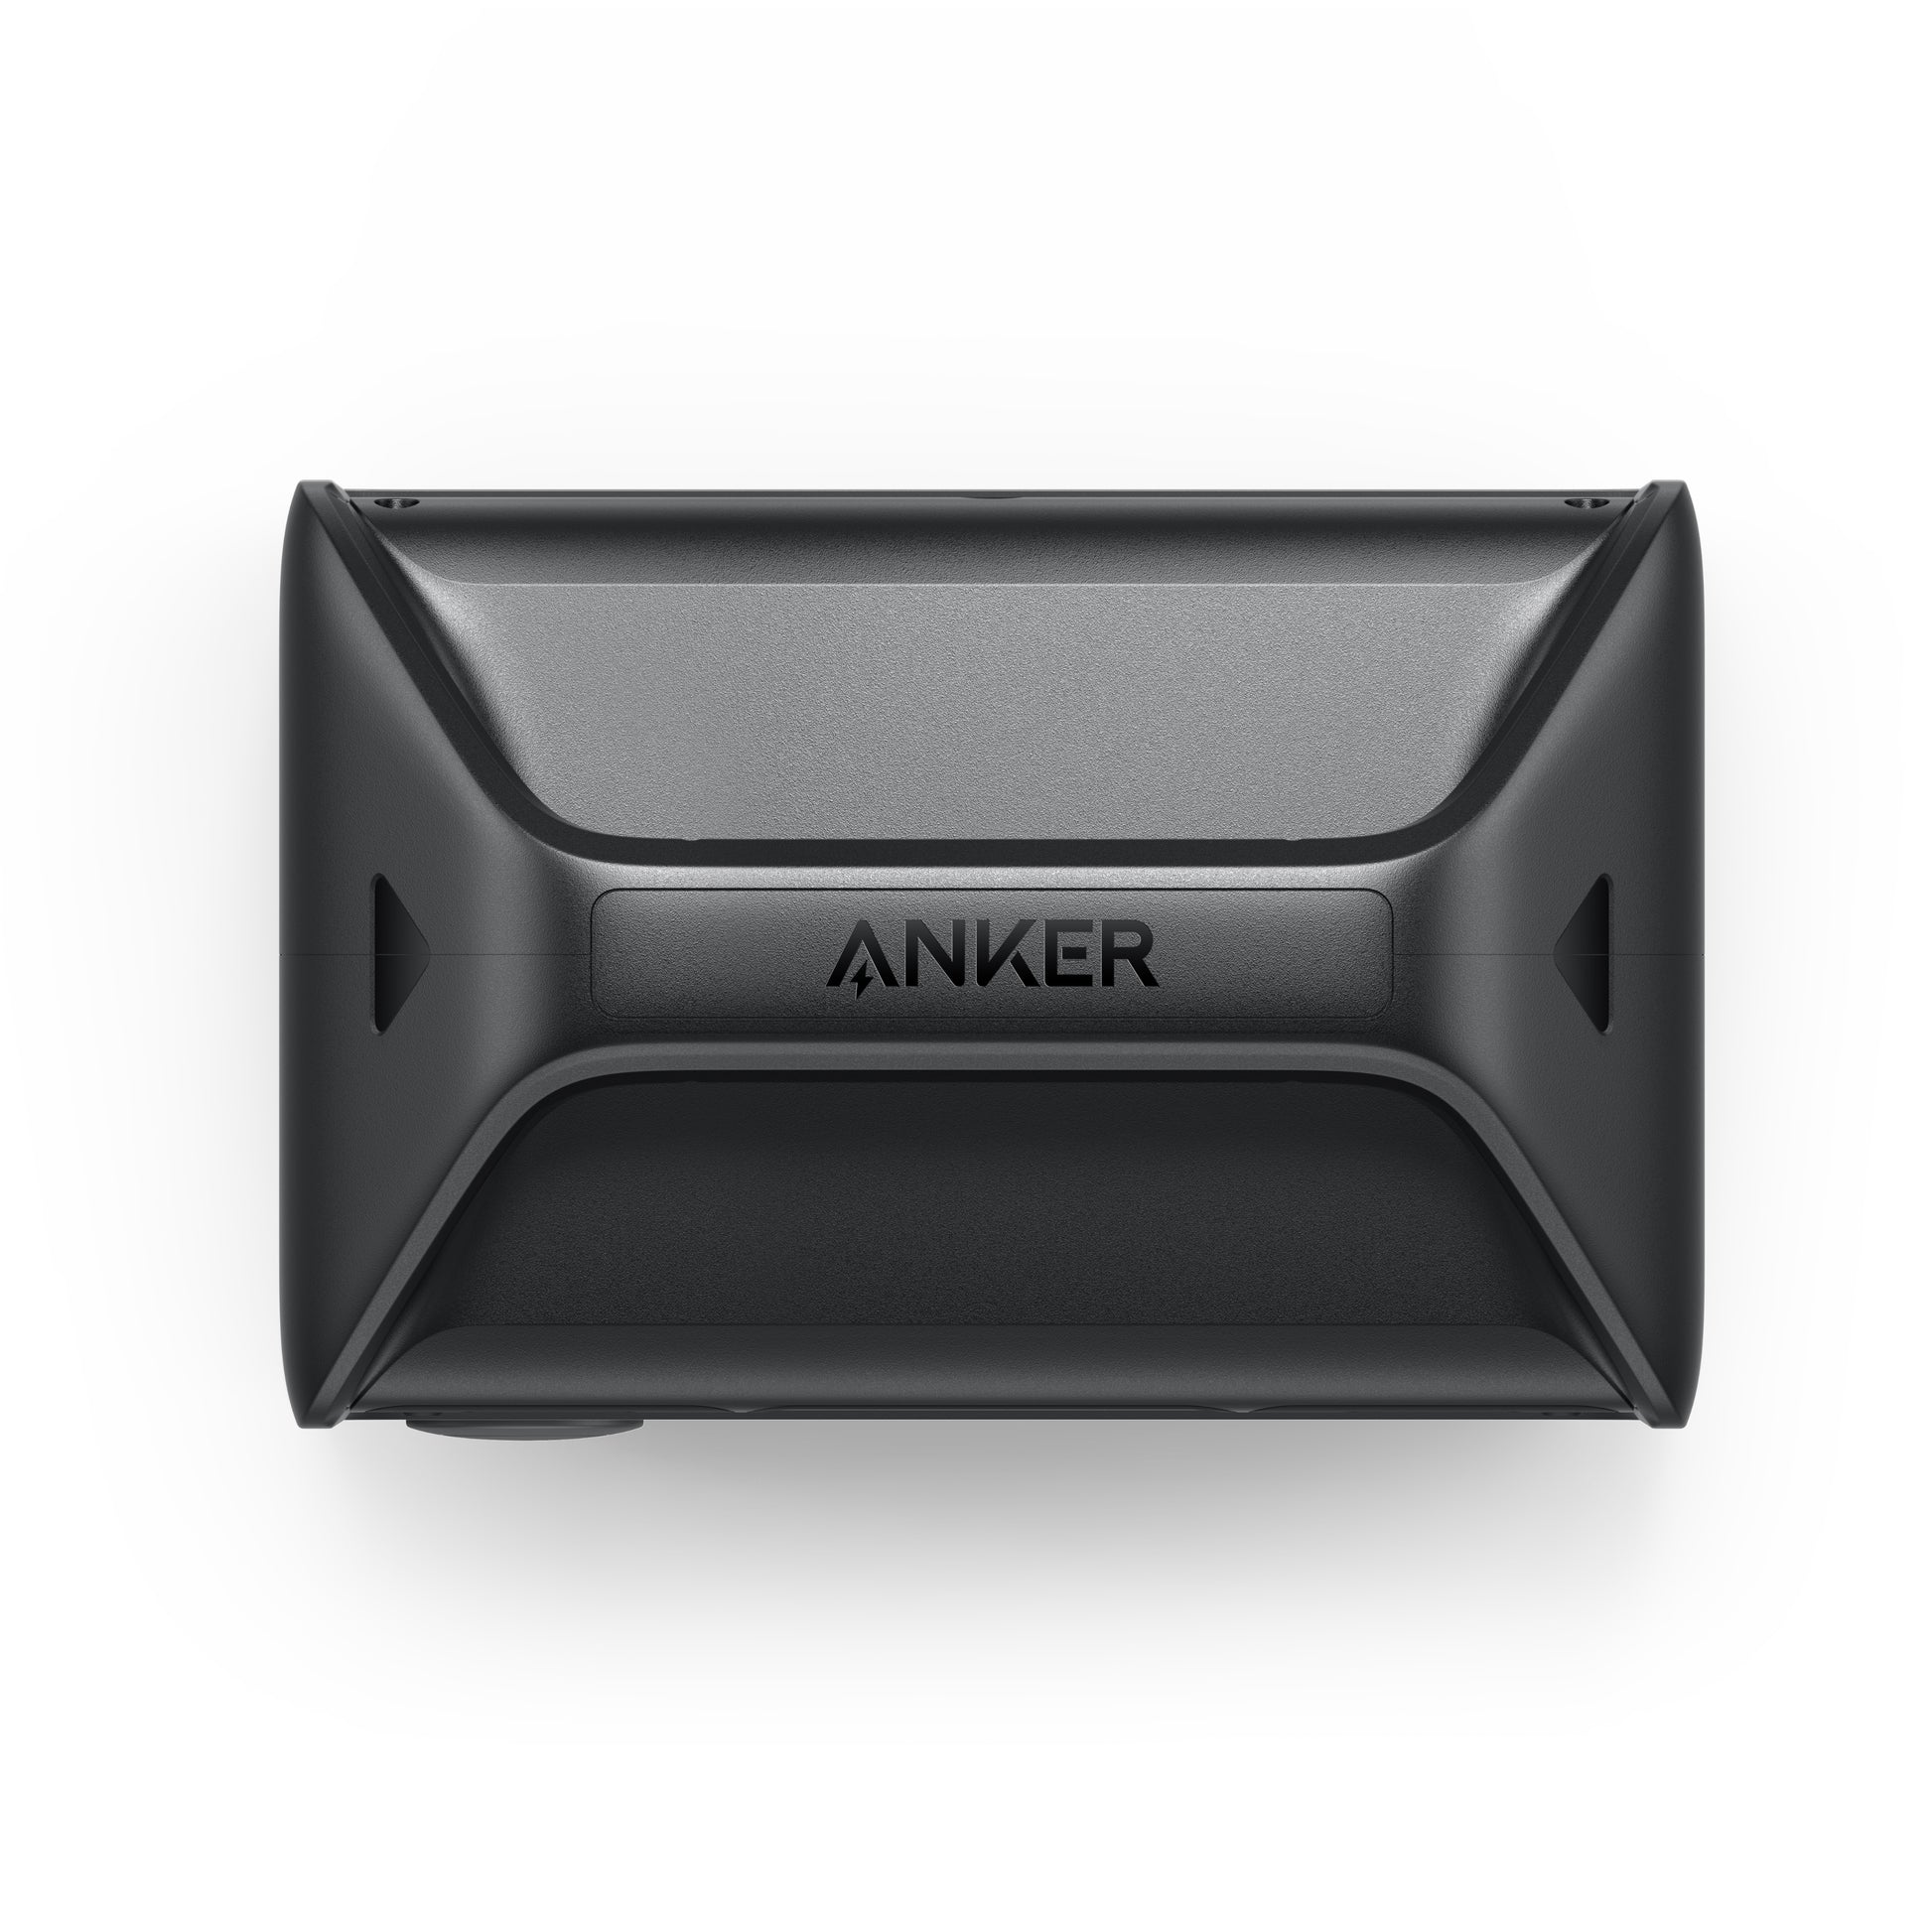 ANKER 521 PPS (POWERHOUSE 256Wh